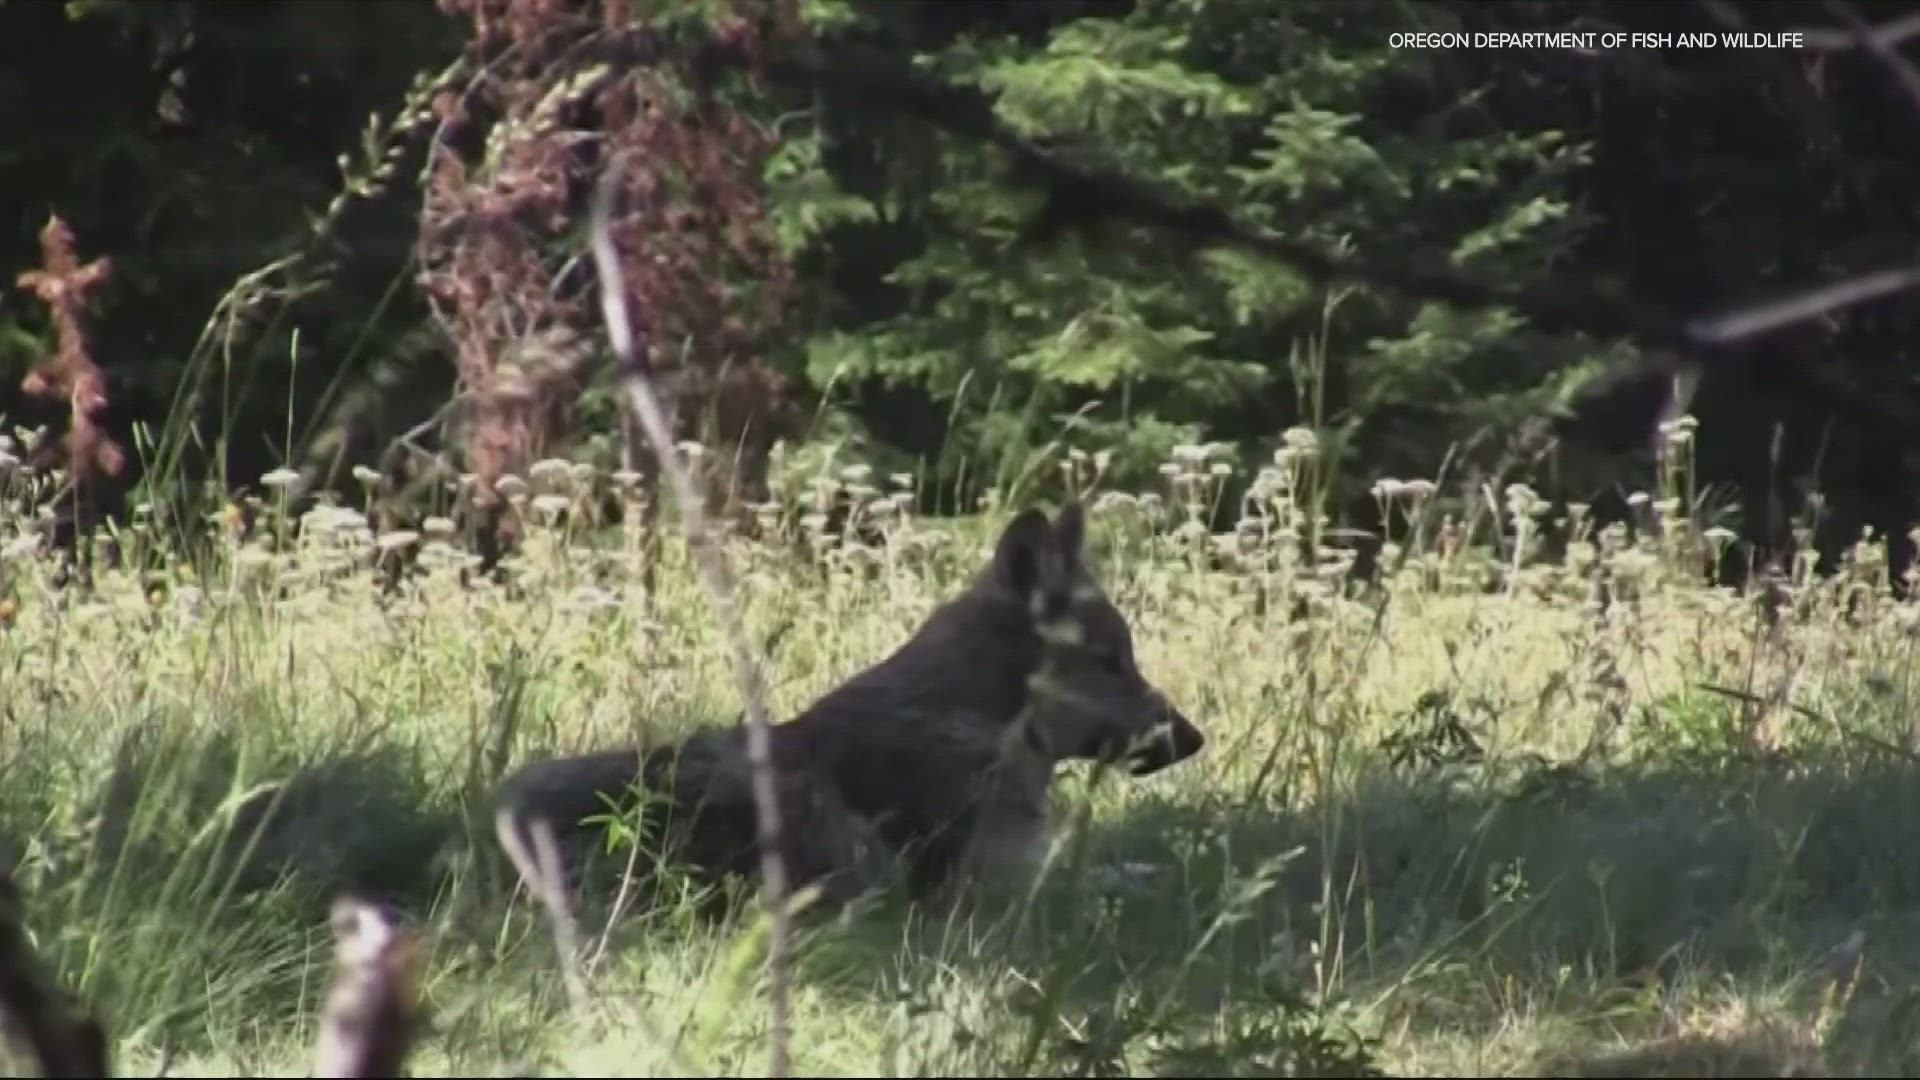 Oregon’s gray wolves prey on cattle sporadically, and a state-managed fund repays ranchers. But the wolves don’t discriminate between livestock and pets.